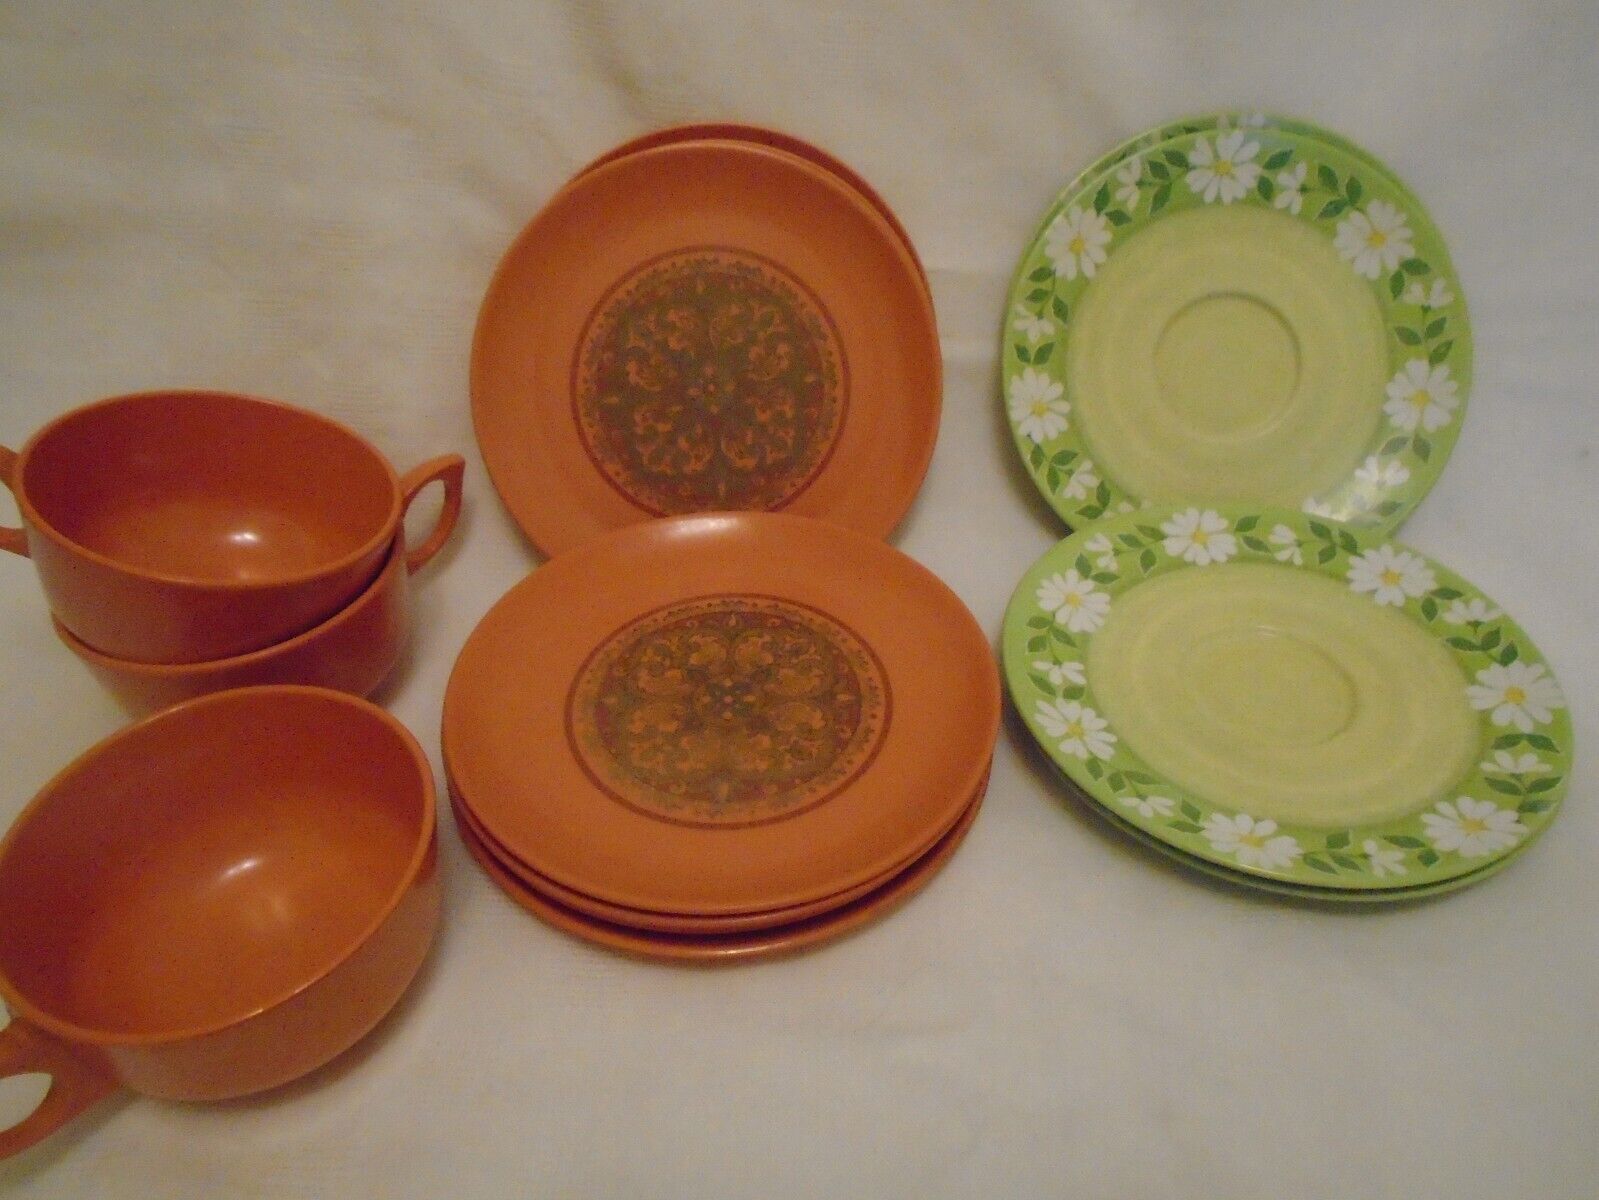 Lot of 15 Vintage Melmac Dishes LAGUNA 301 and Daisy Pattern PRICING TO SELL